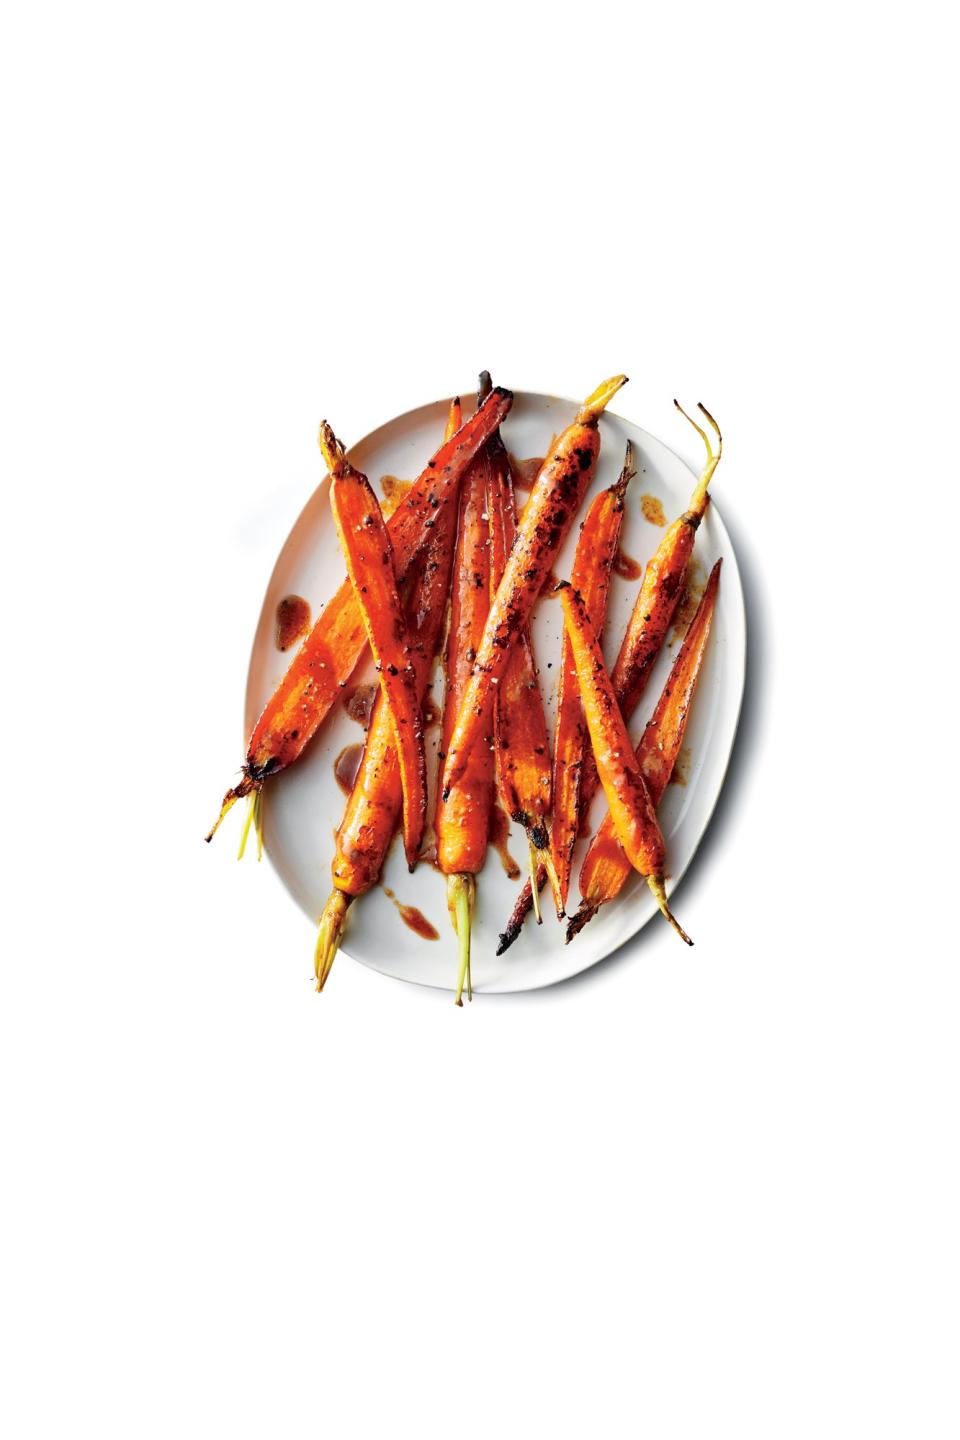 Pan-Roasted Carrots